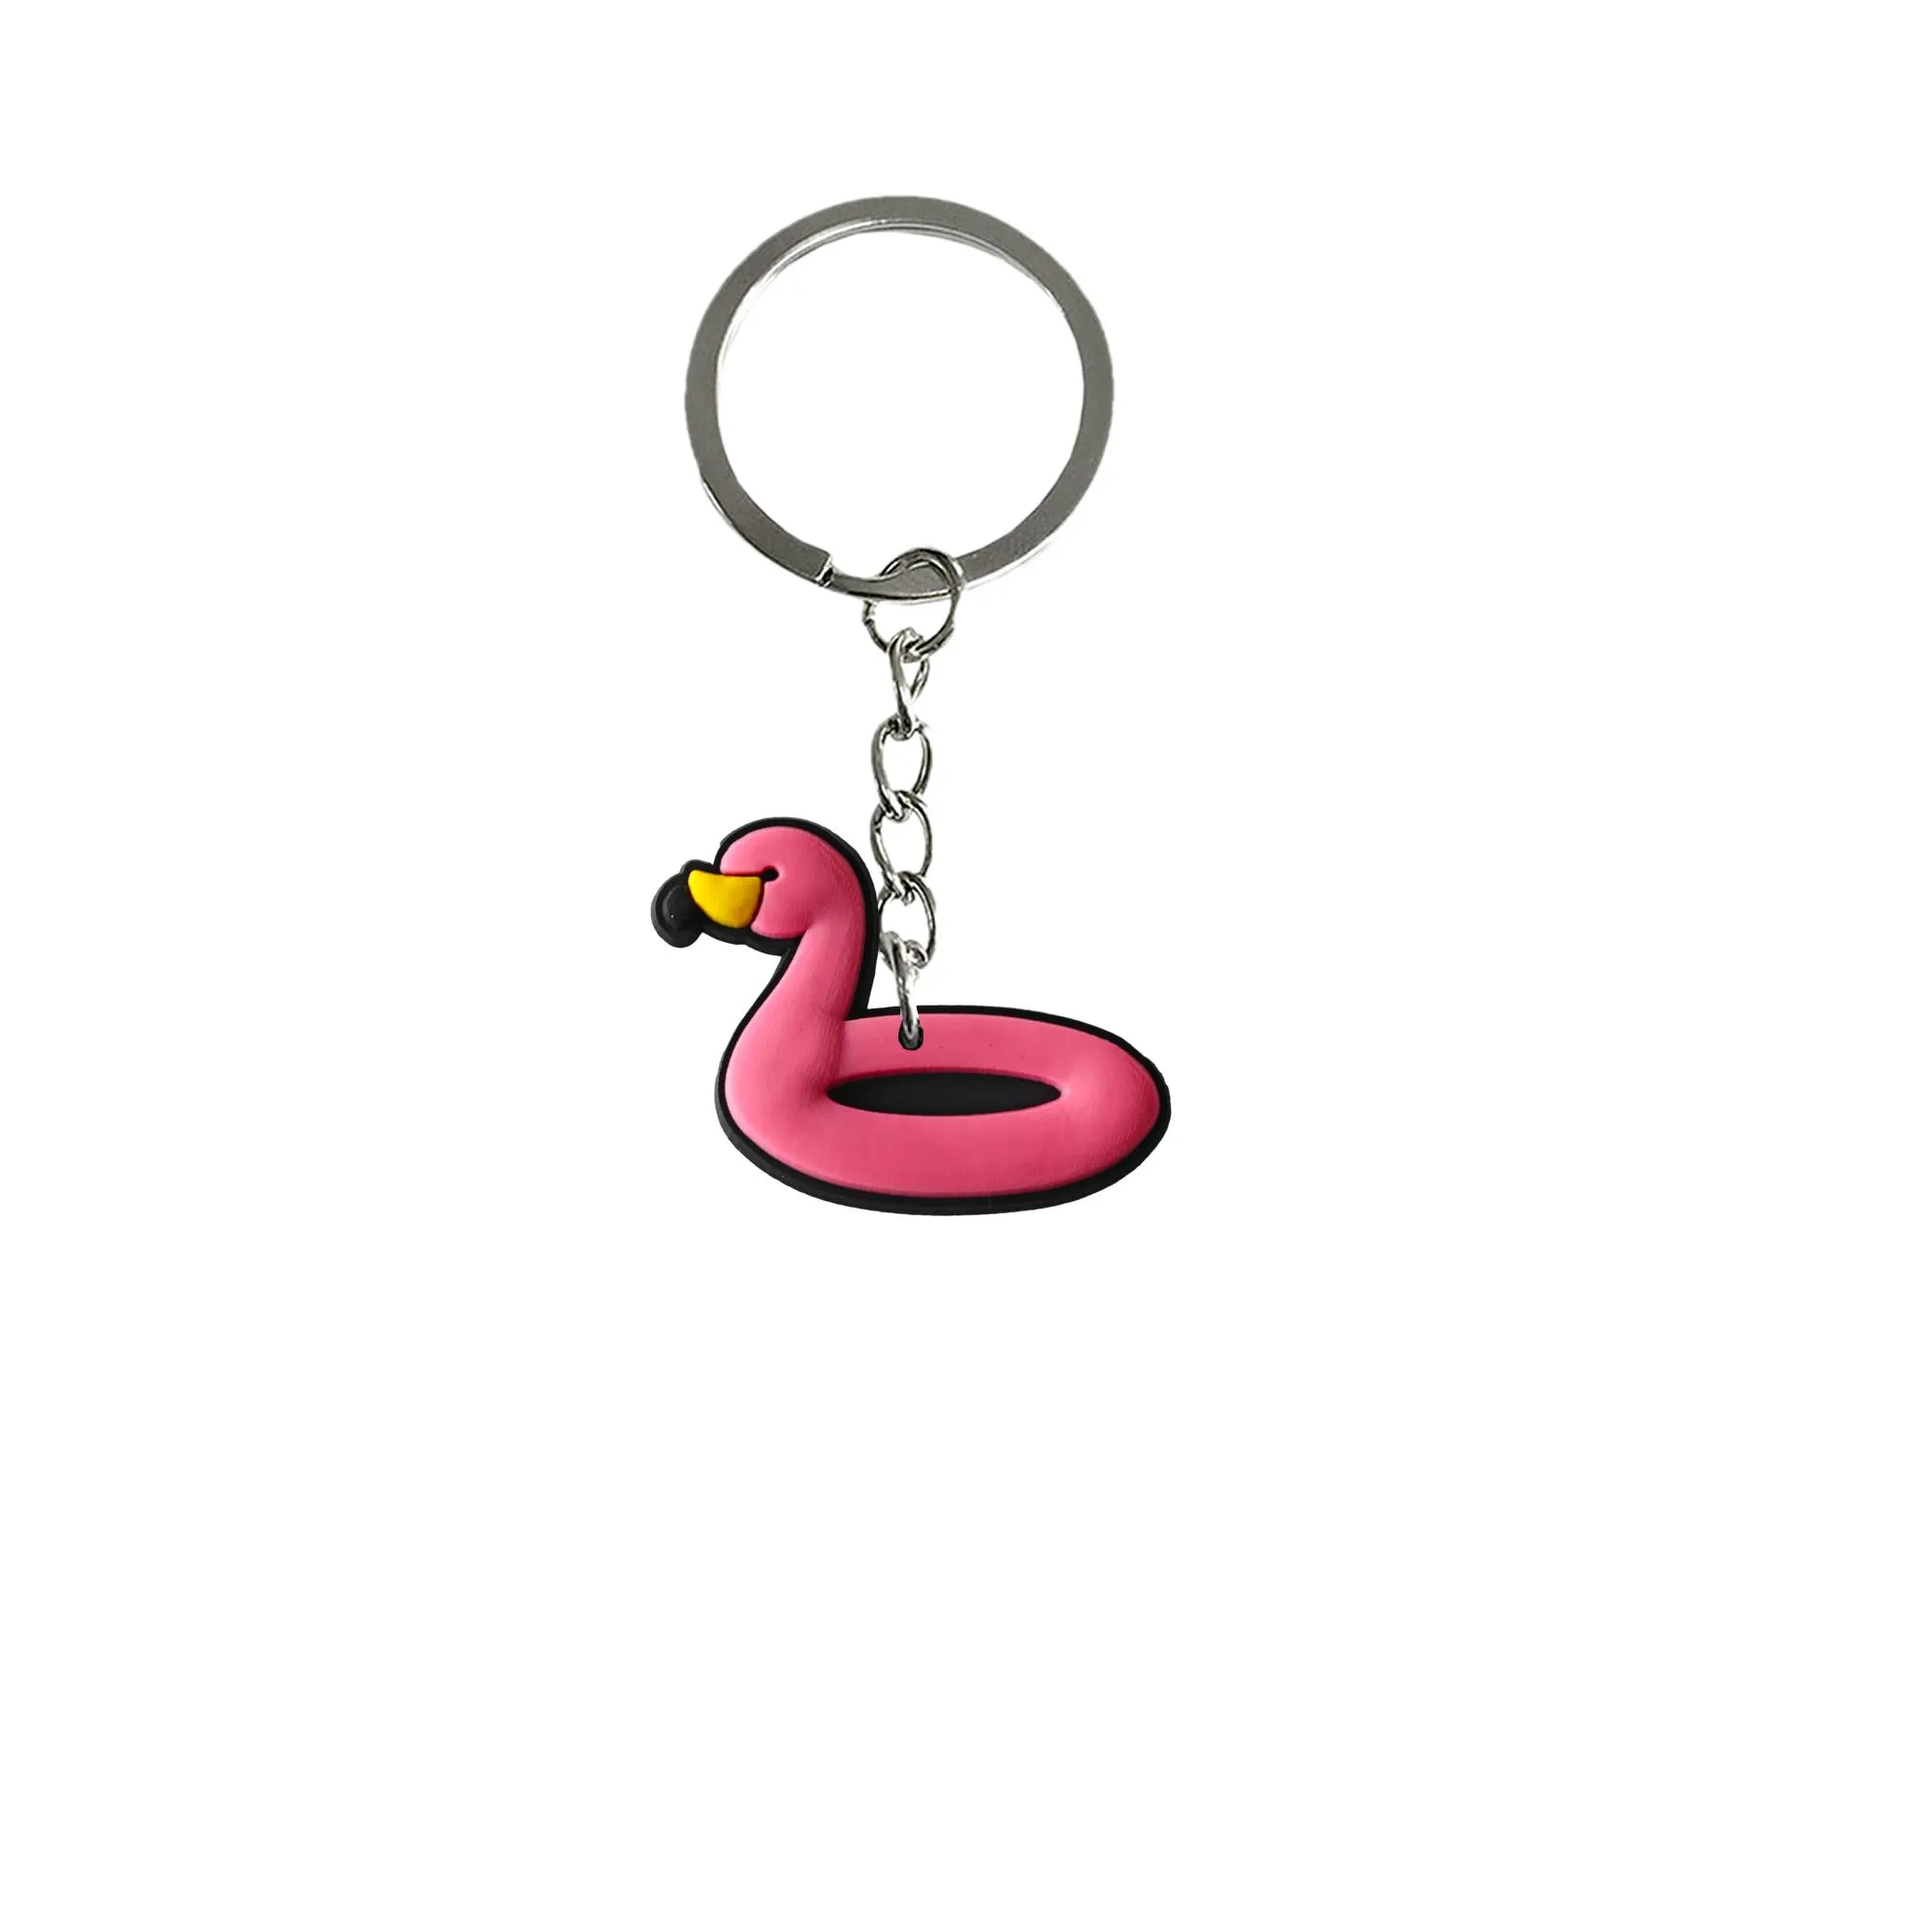 pink frog keychain for kids party favors key chain kid boy girl gift keyring suitable schoolbag boys keychains car bag ring